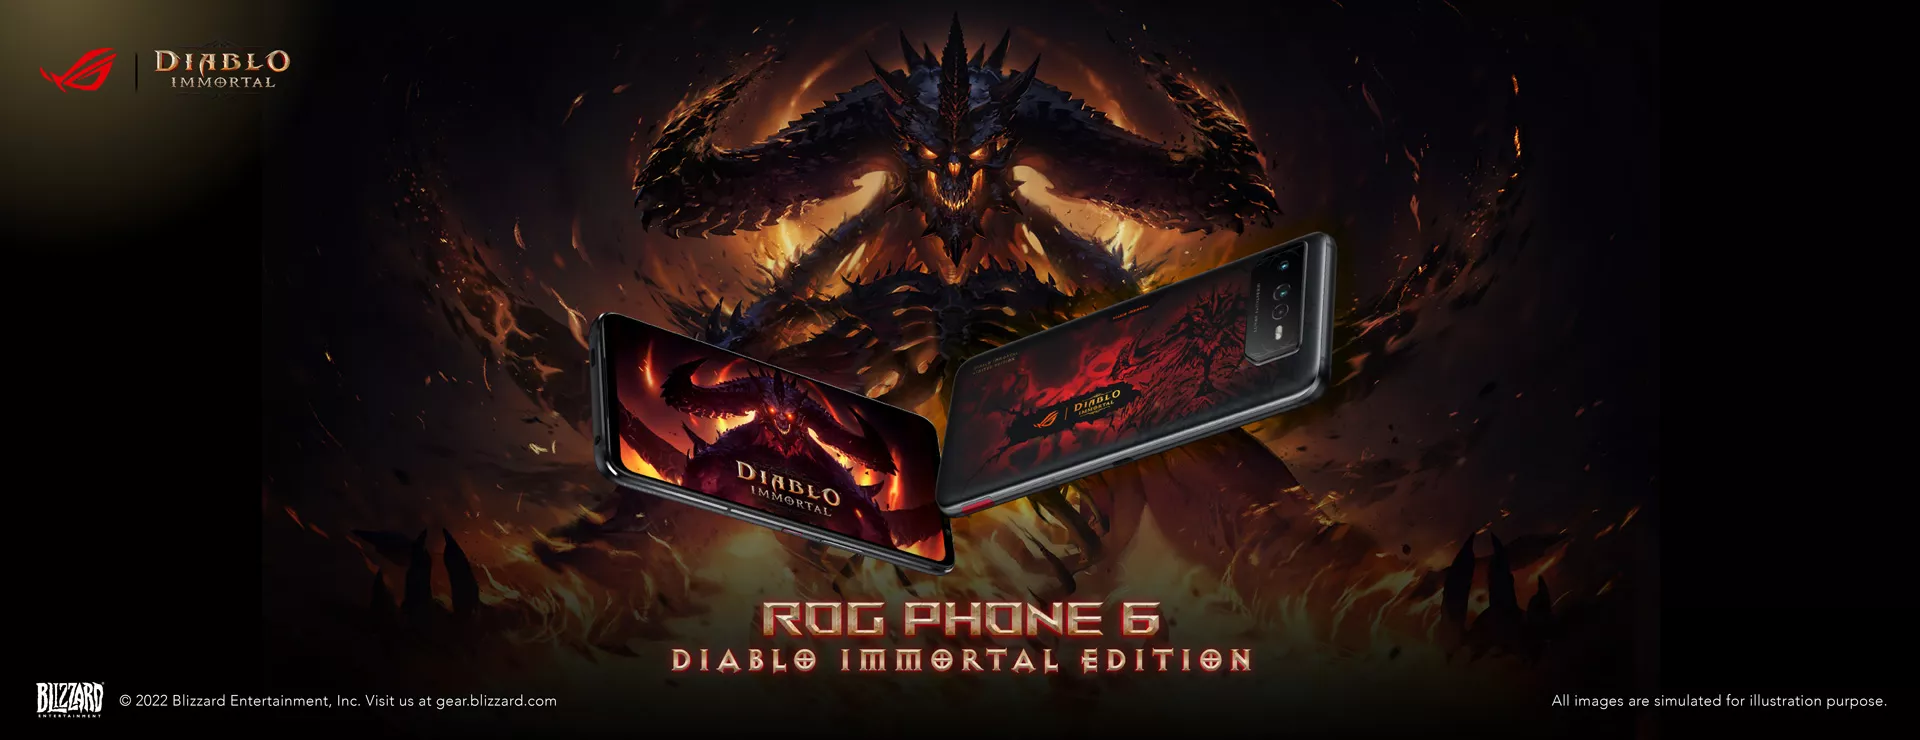 Two ROG Phone 6 Diablo Edition floating in the middle and showing the front and back sides of the phone, in front of the key visual with the Diablo character standing in burning flame.